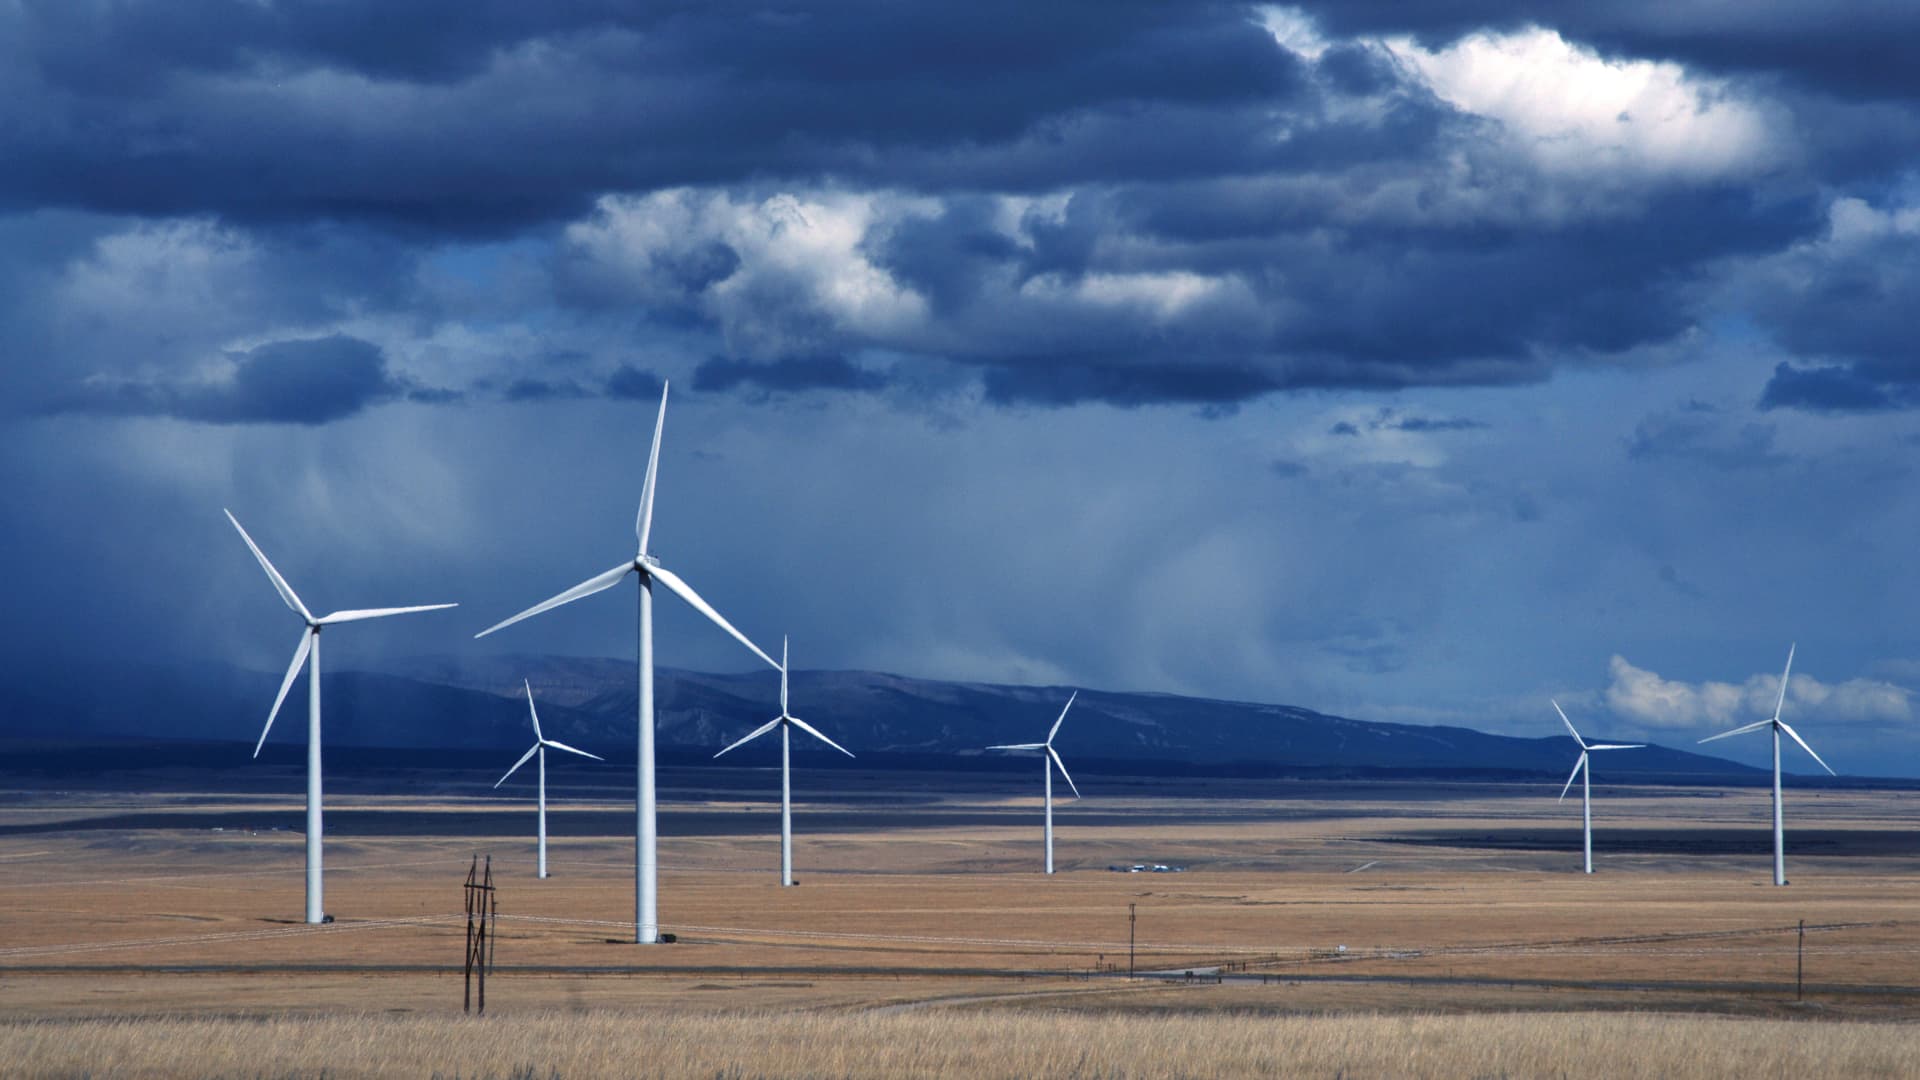 GE is laying off 20% of its workforce devoted to onshore wind power, costing hundreds of jobs